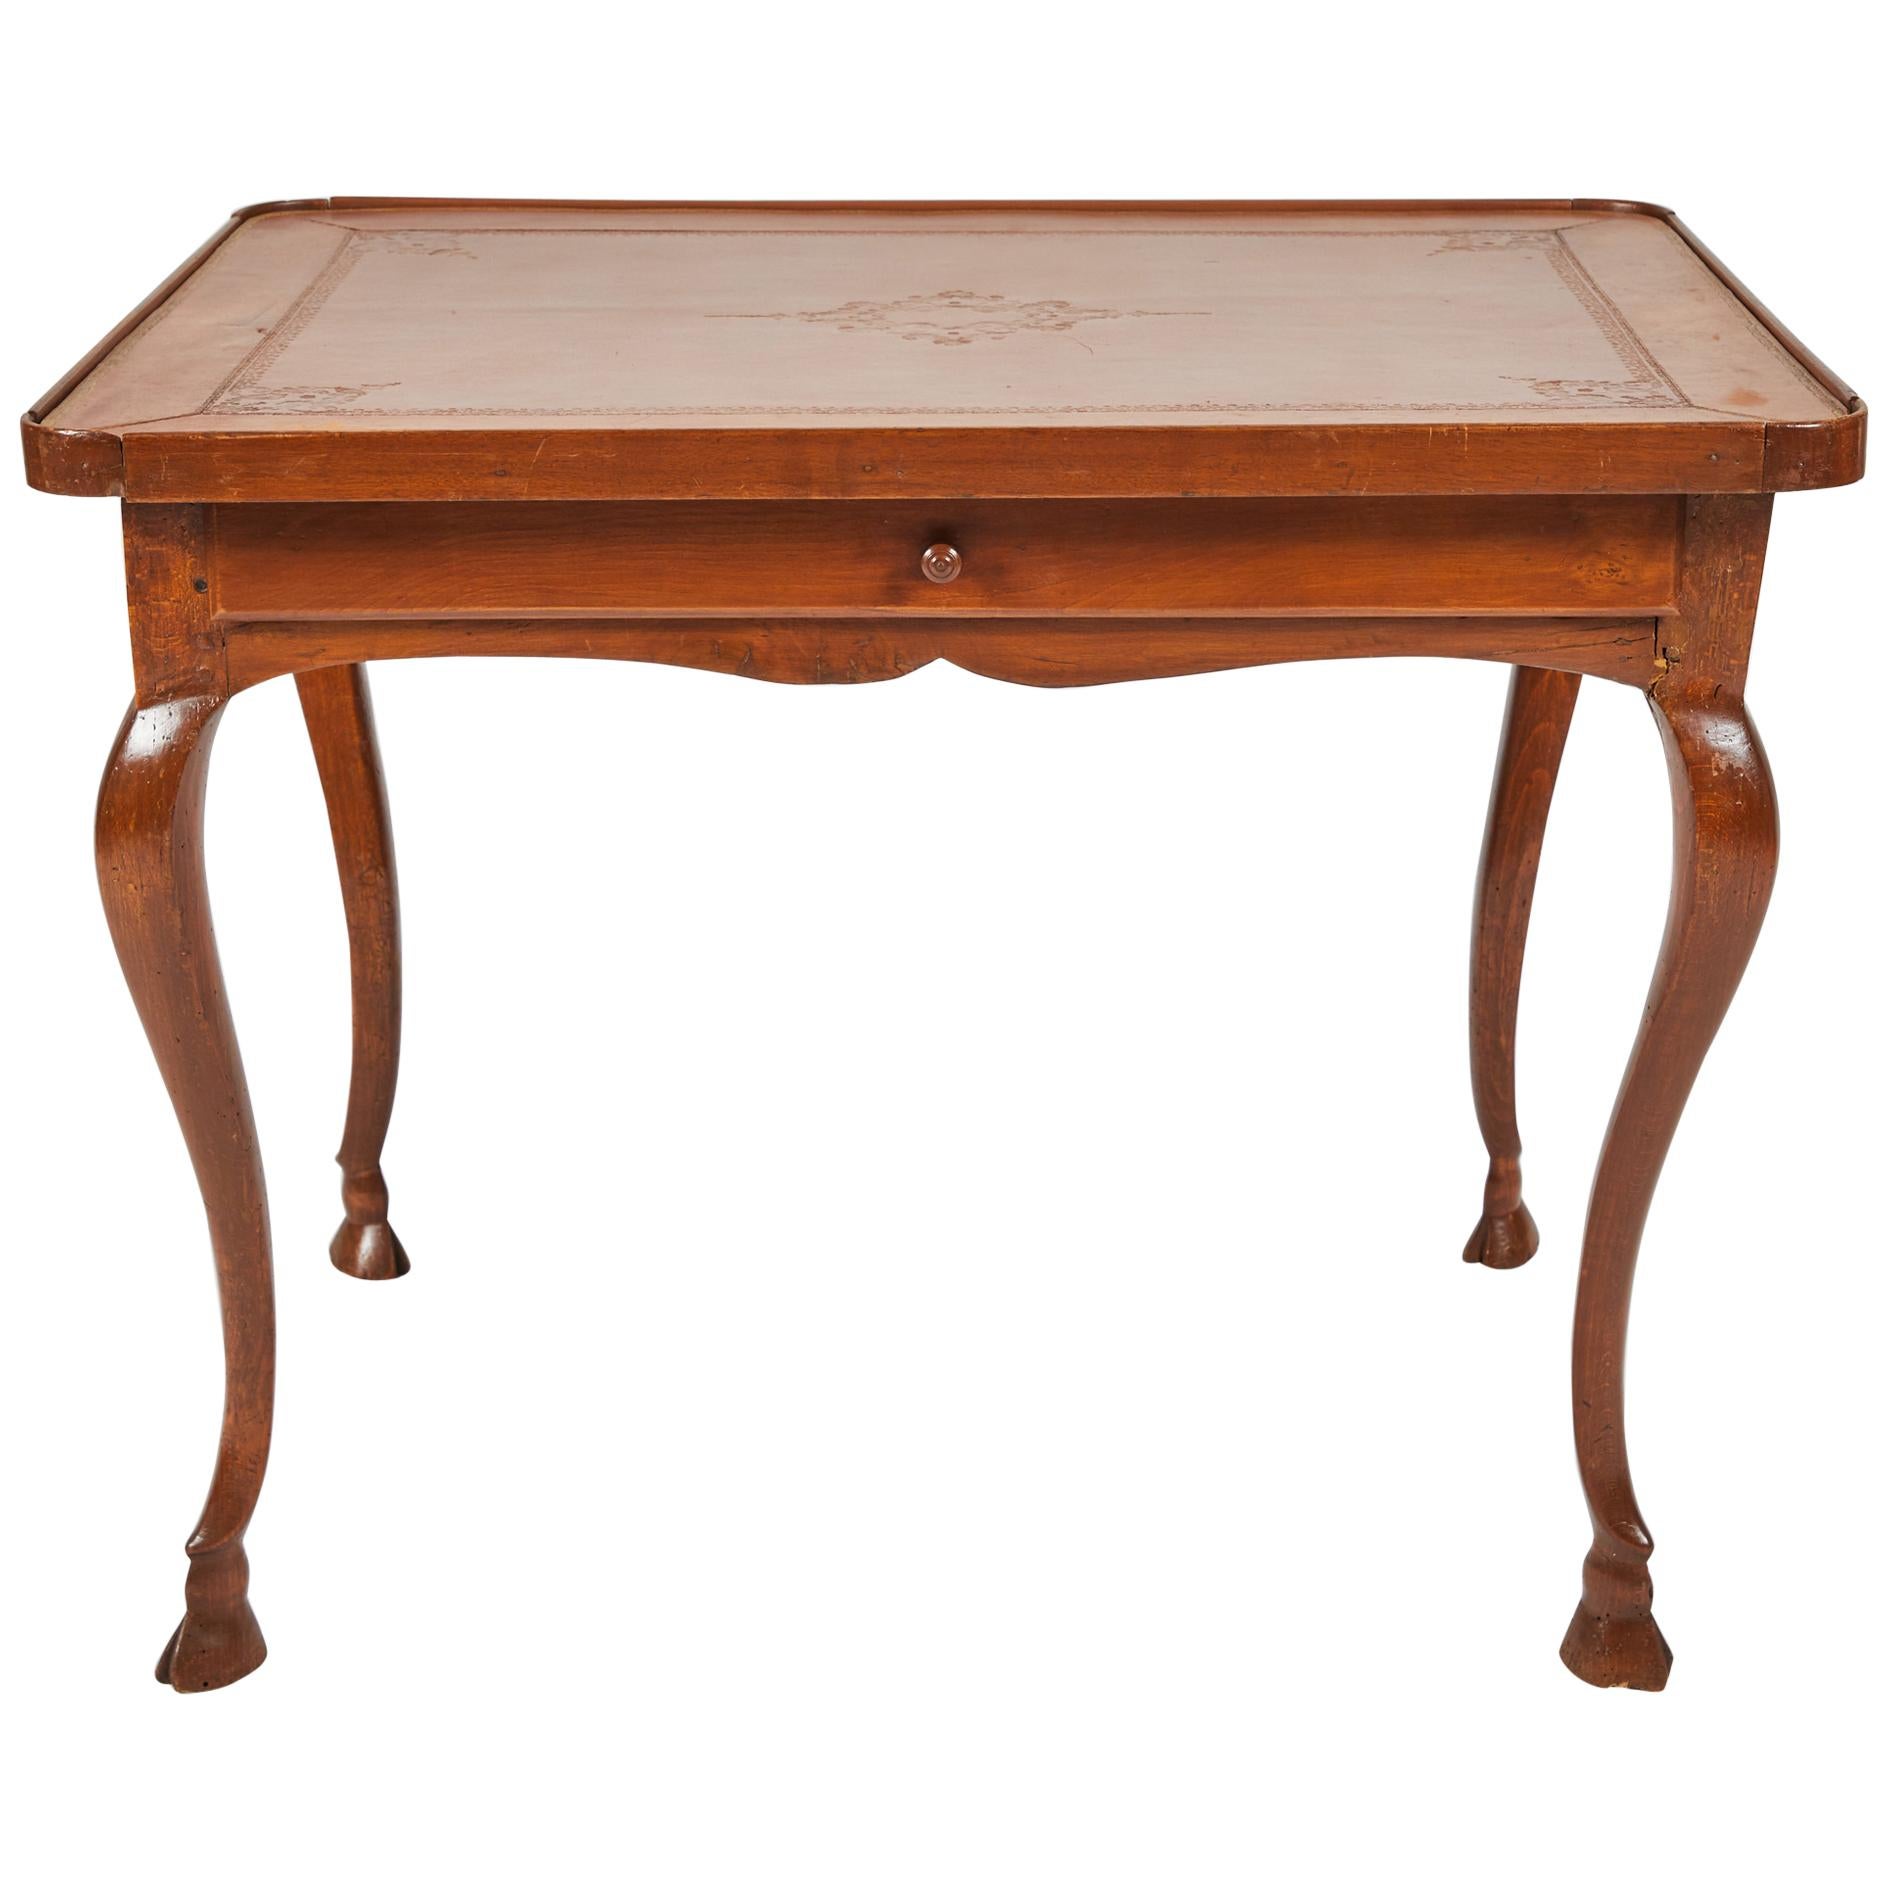 Early 19th Century Continental Rococo Style Walnut Leather Top Writing Table For Sale